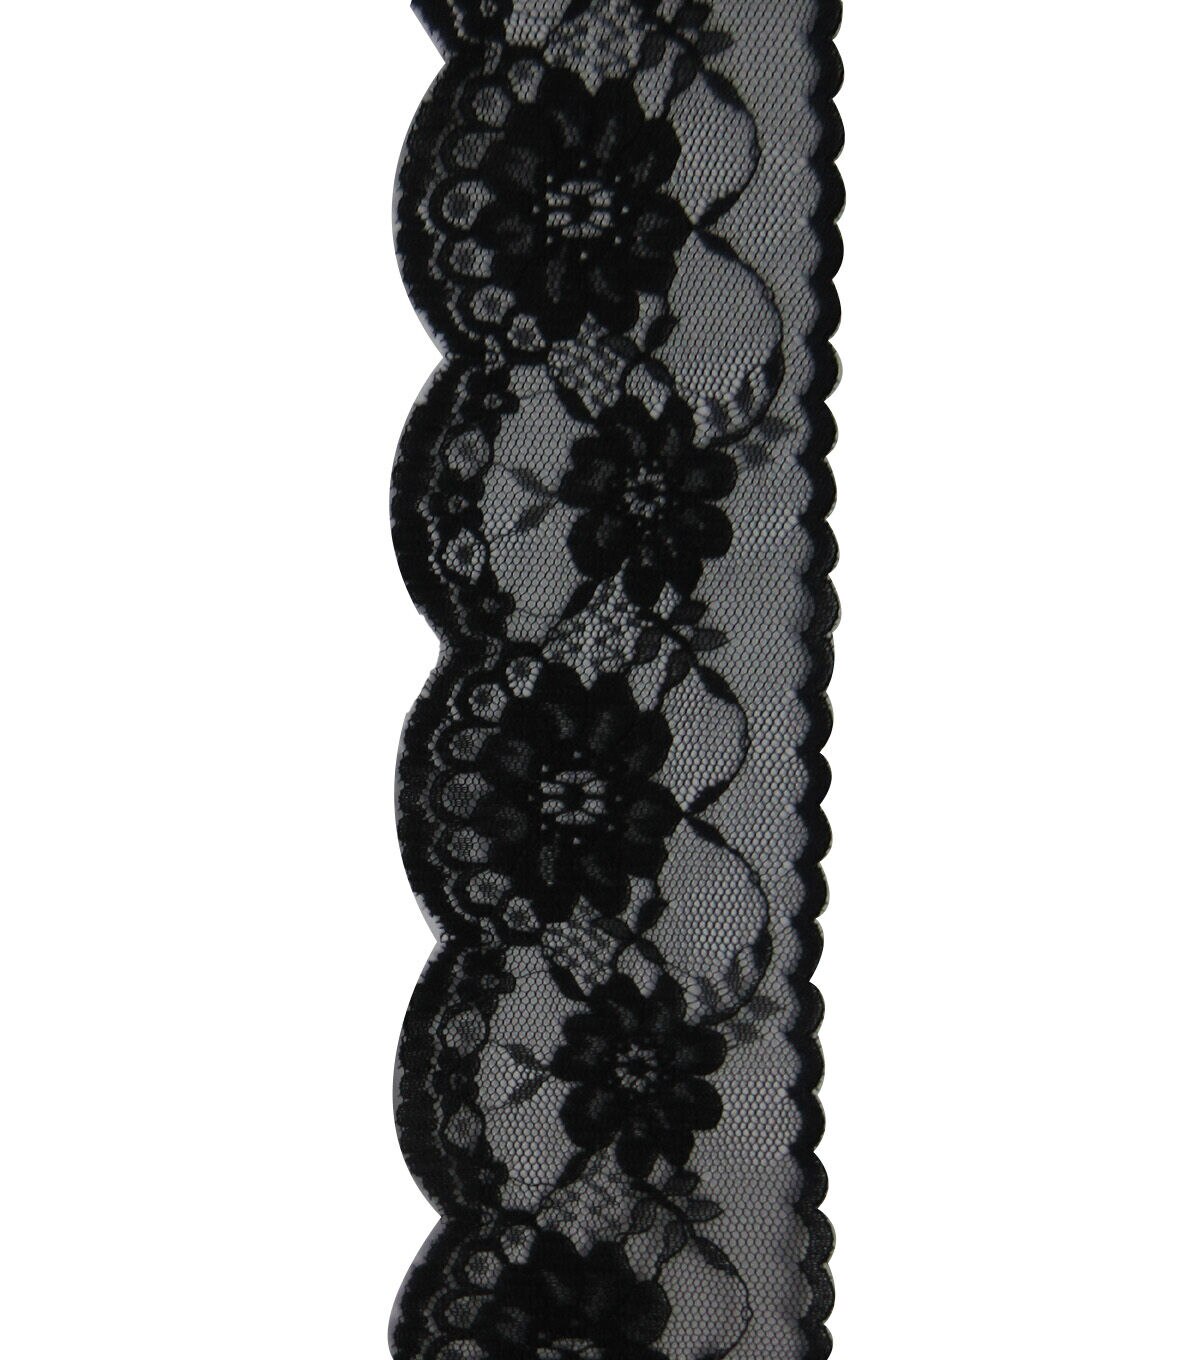 2.4 Inch Black Lace Ribbon,Sewing Lace Trim, Elastic Stretchy Black Lace  Fabric - 5 Yard,Perfect for Crafting,Wedding,Gift Wrapping,Bow Making &  Other